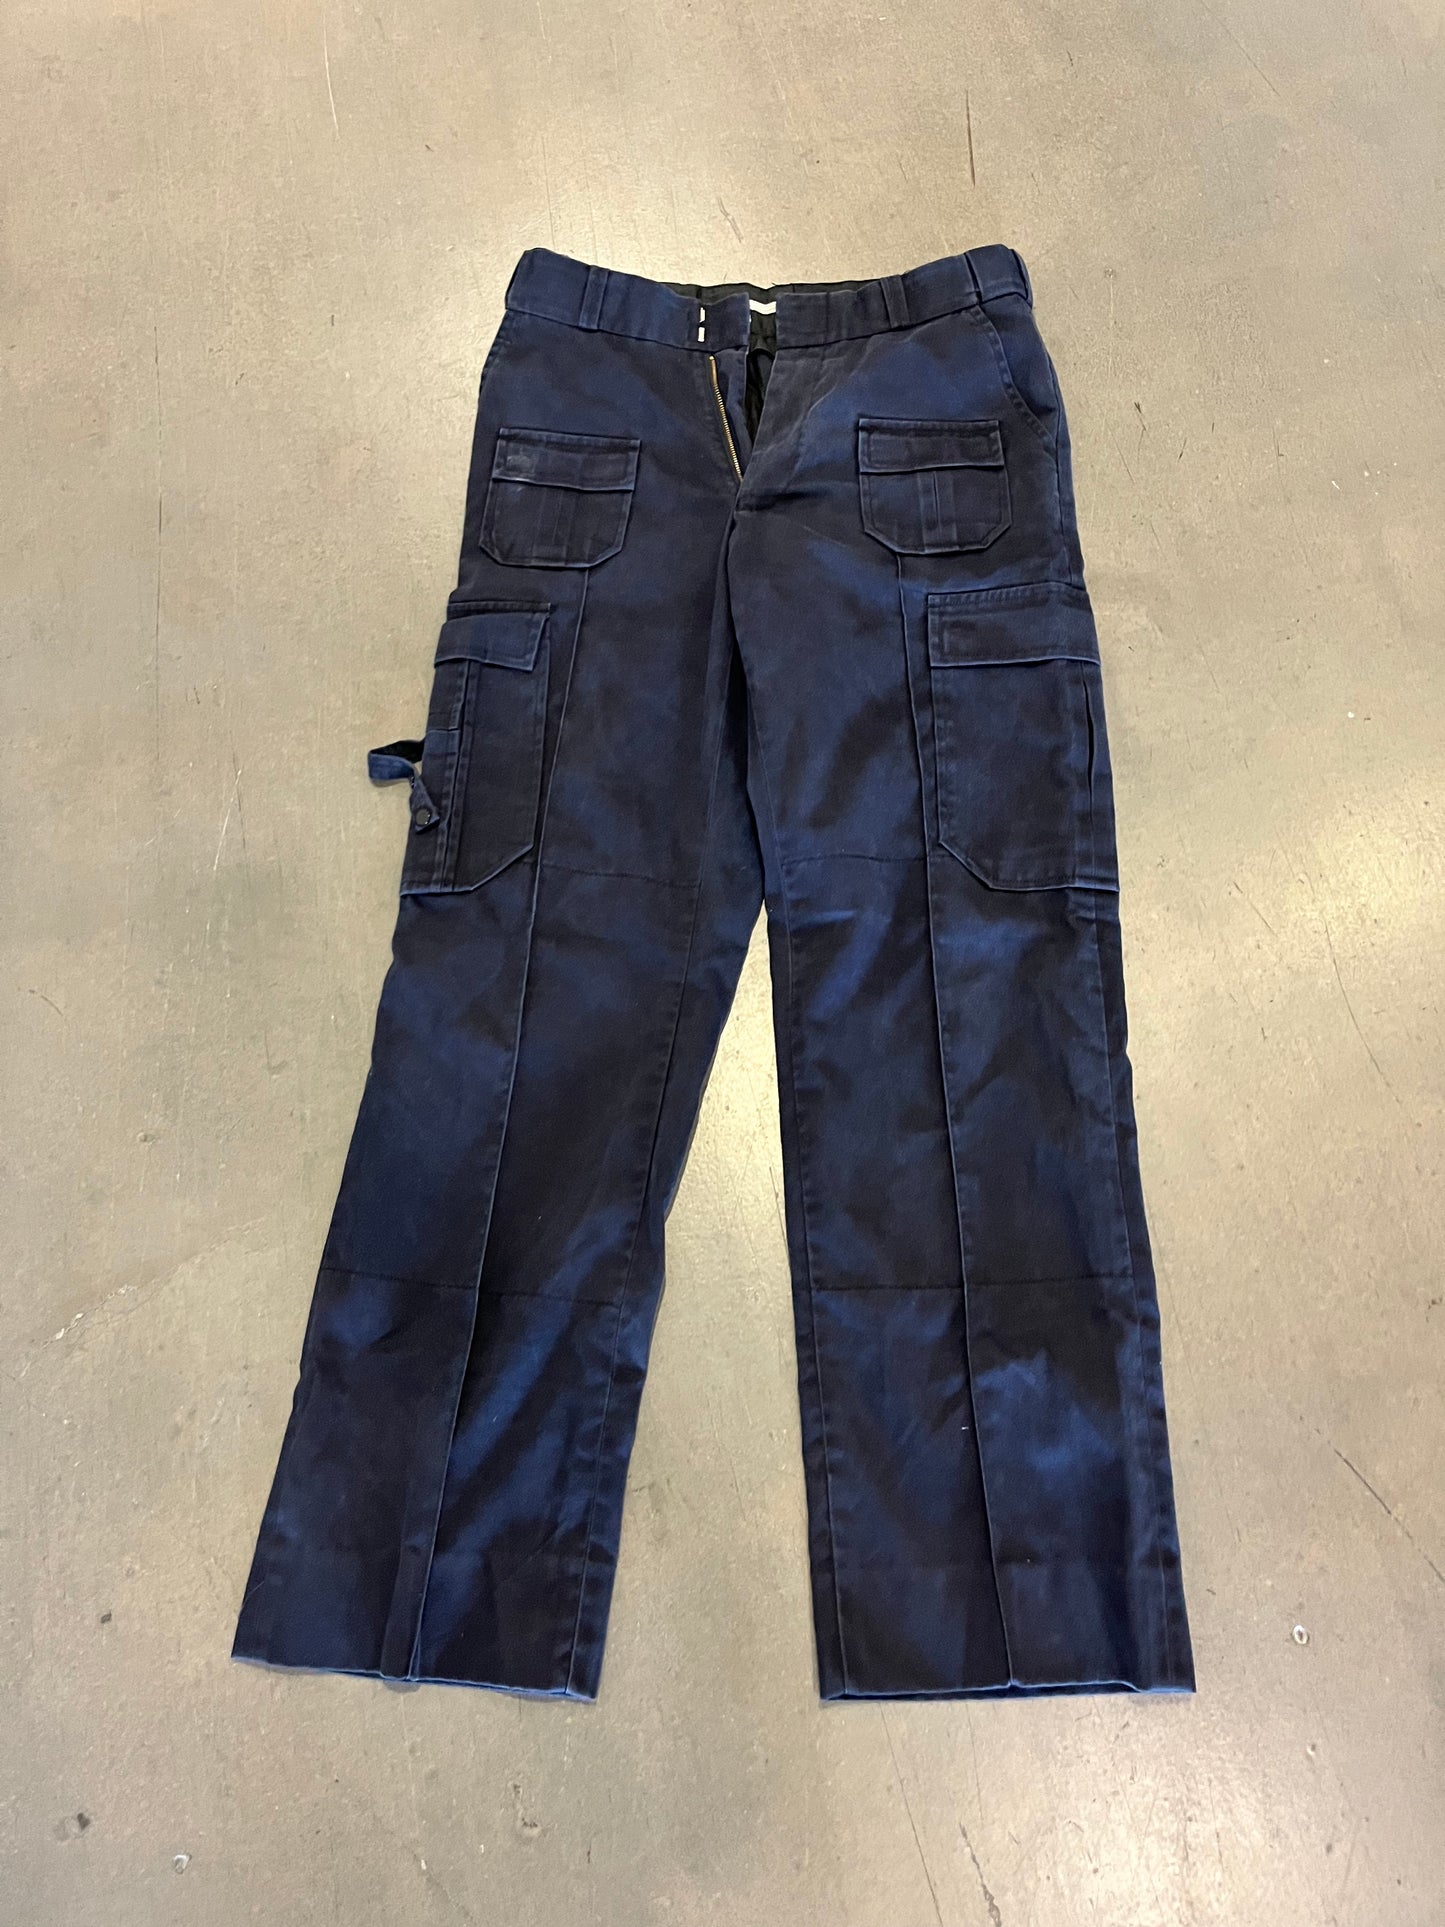 SHADES OF BLUE: Harlee's NYPD Navy Tactical Pants (M)